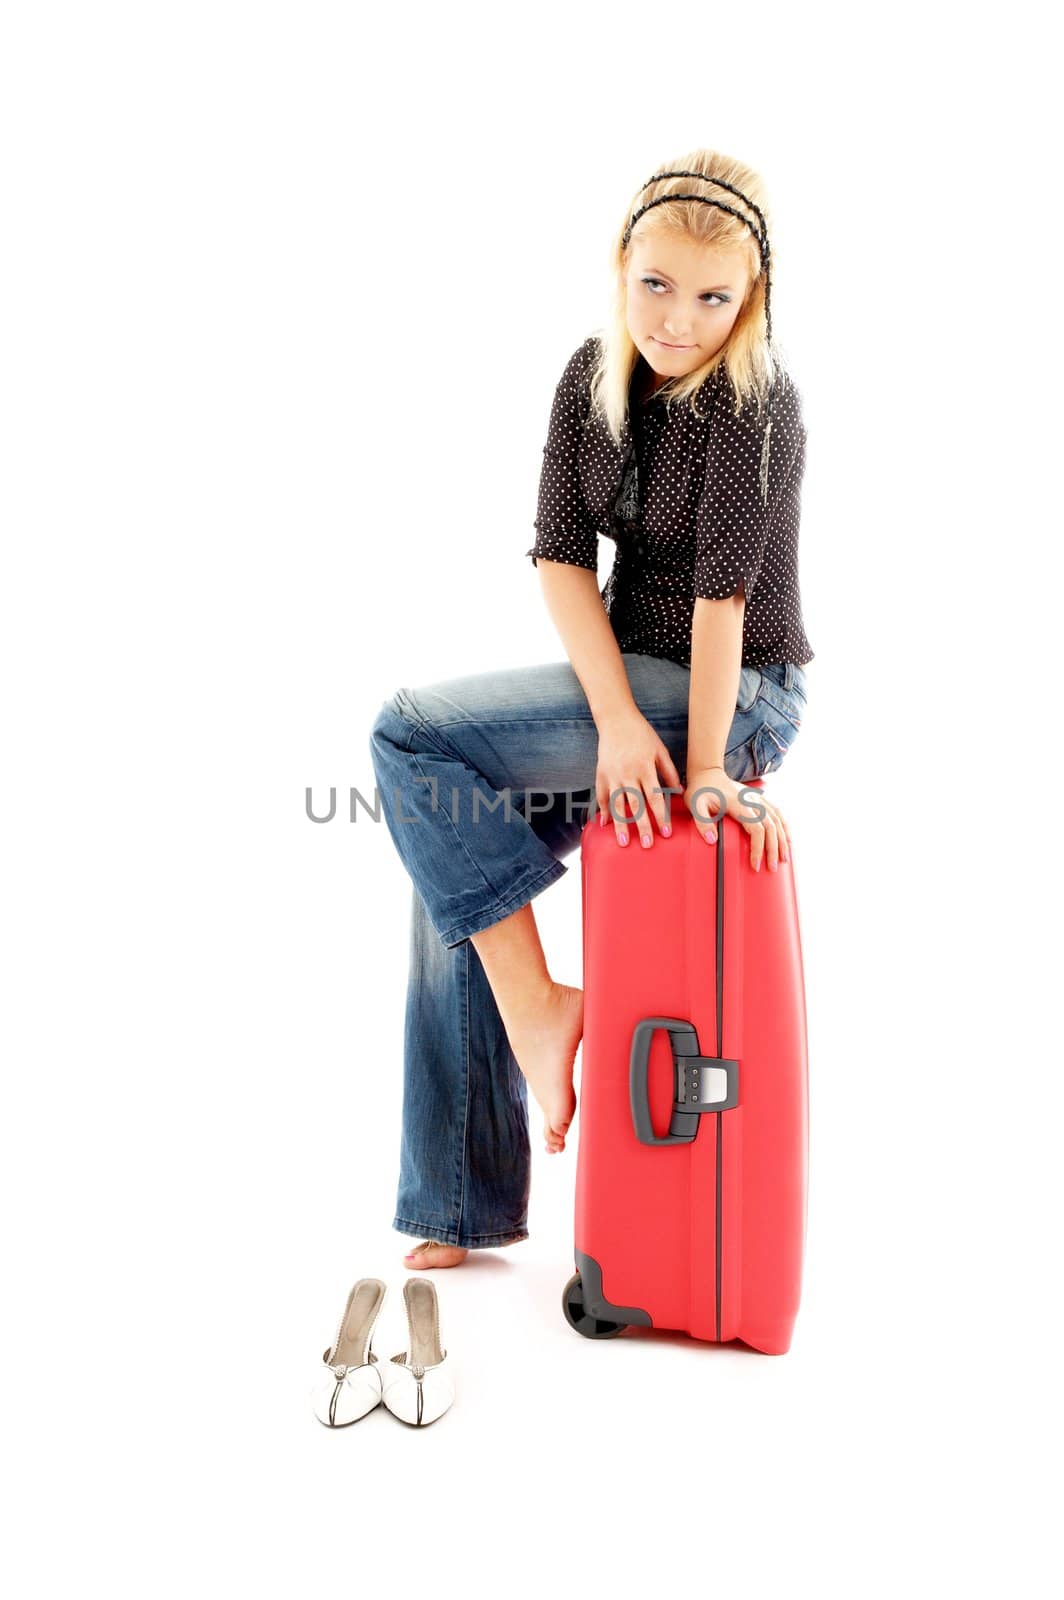 lovely blond with red suitcase by dolgachov